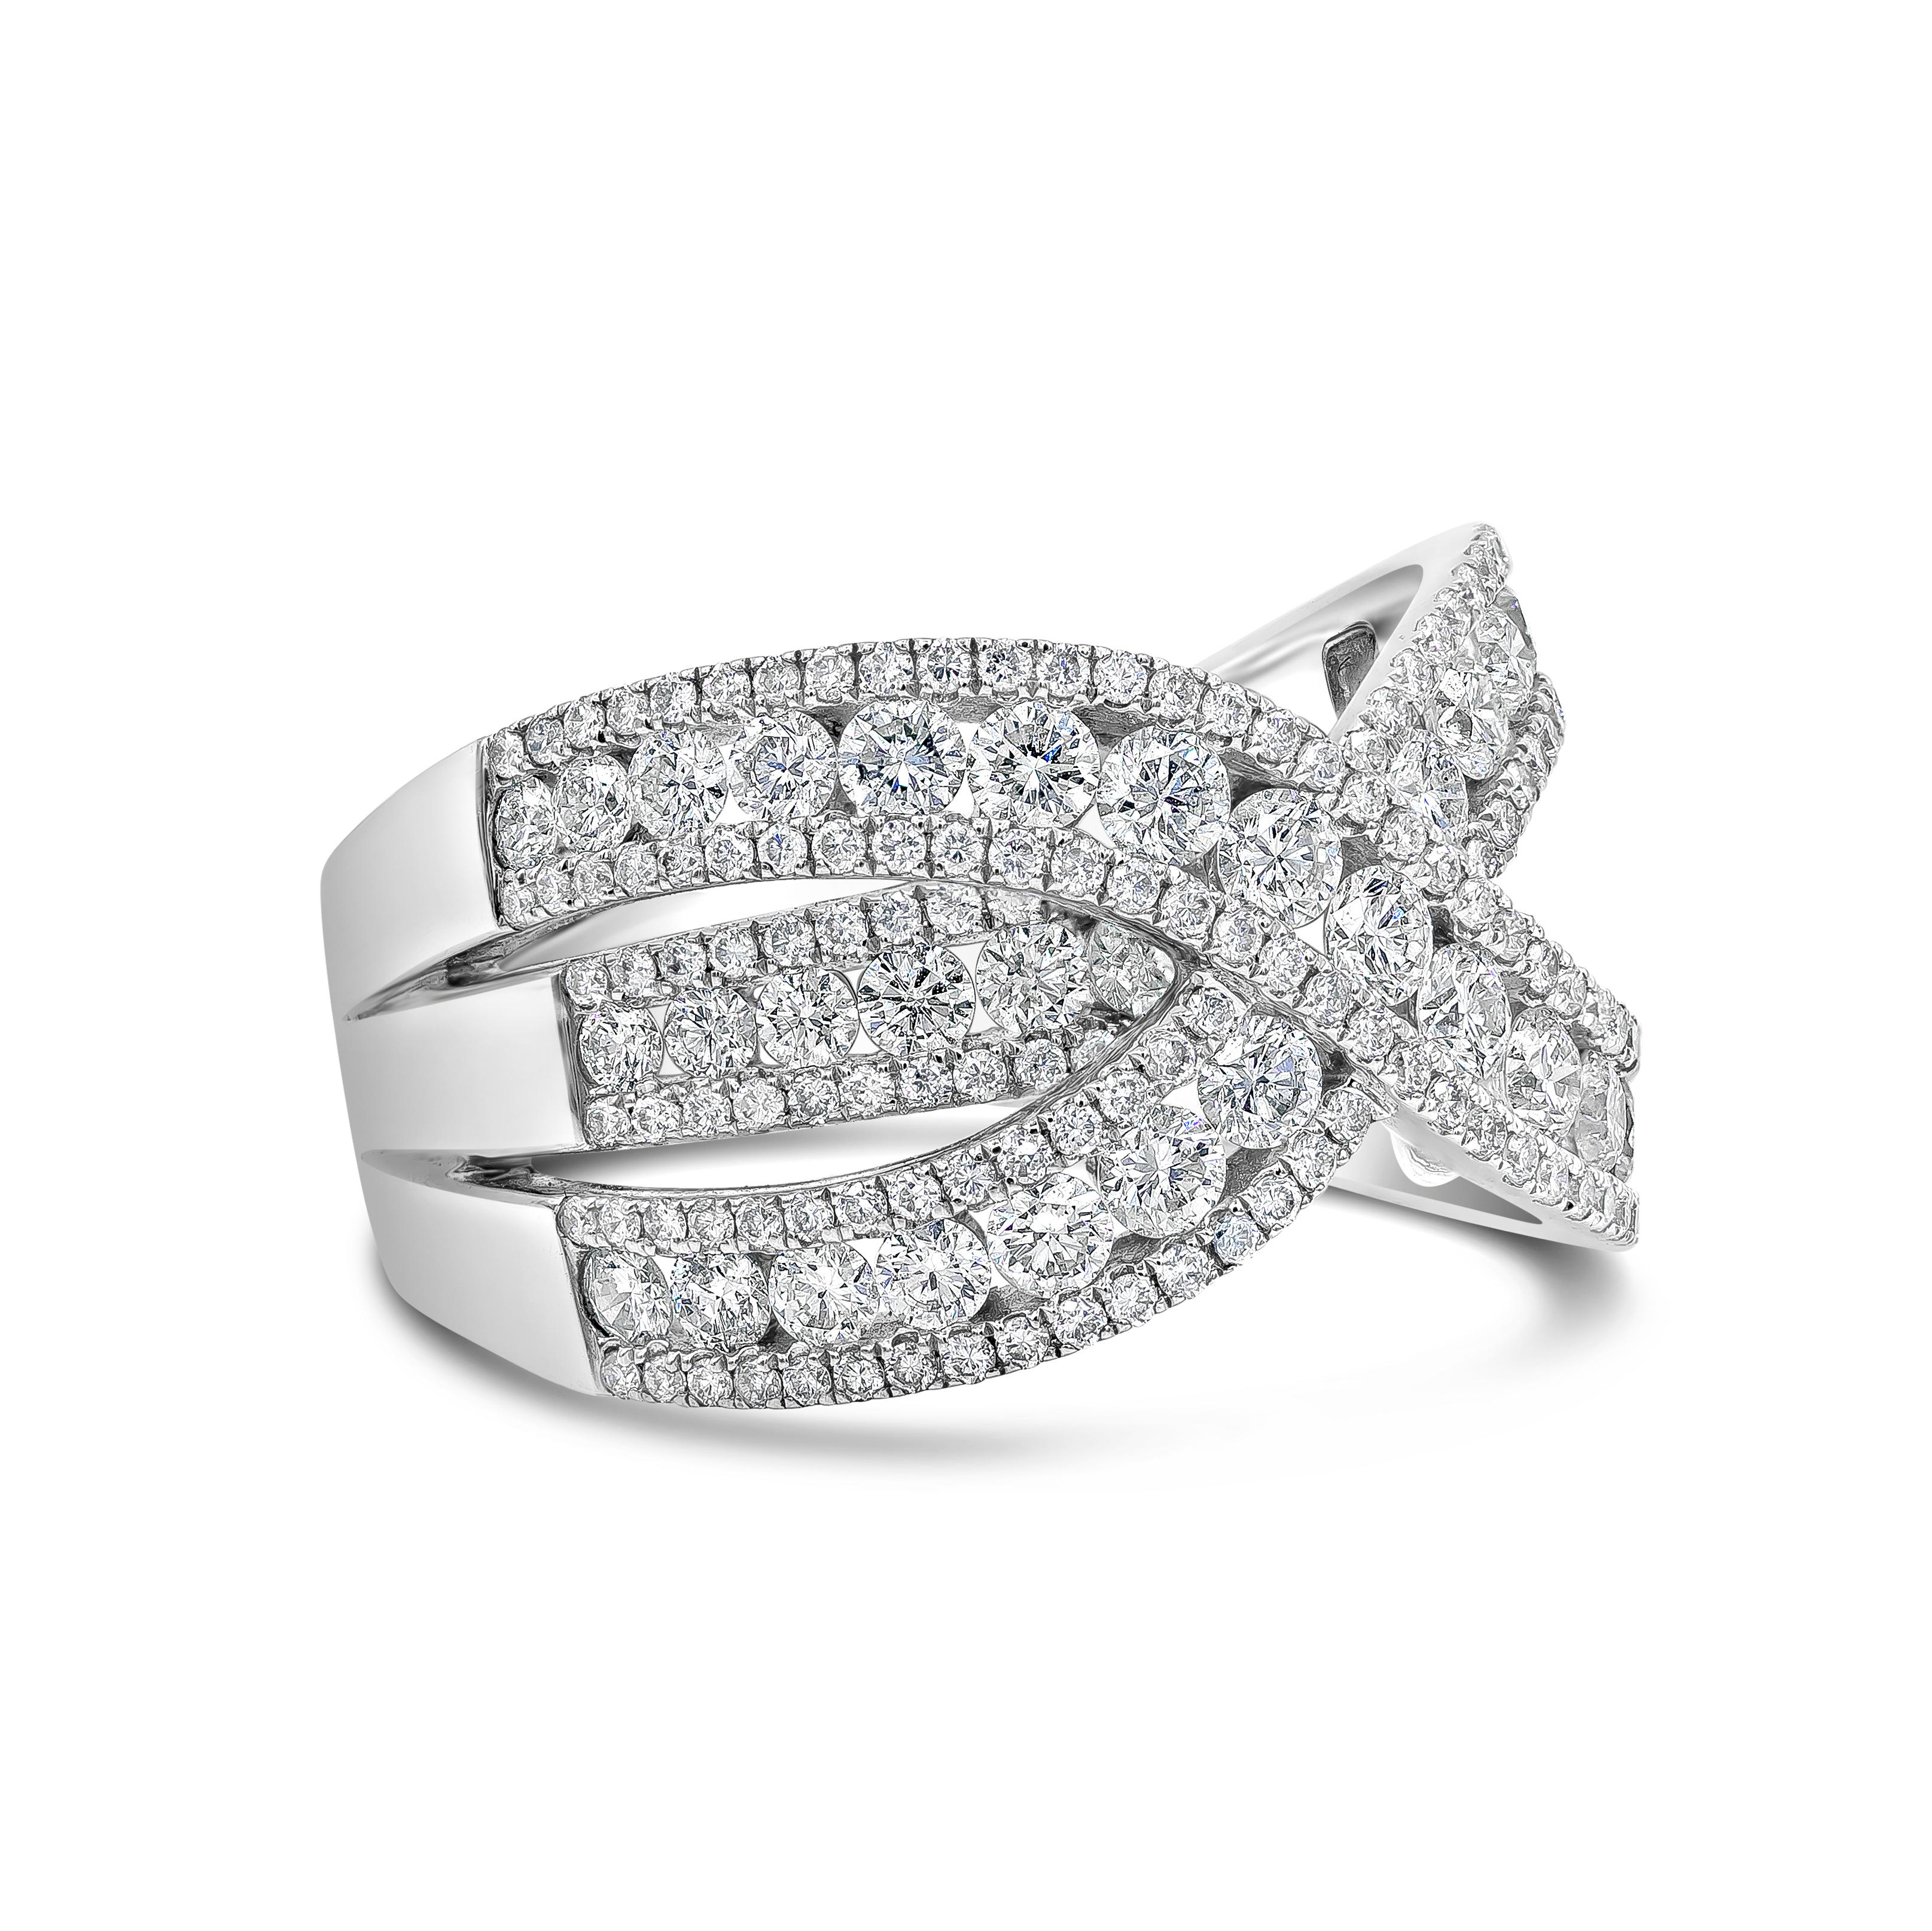 A brilliant and chic fashion ring showcasing three rows of round brilliant diamonds channel set in a diamond encrusted white gold mounting. Two rows cross in the middle of the ring and Diamonds weigh 2.42 carats total. Made in 18K White Gold and